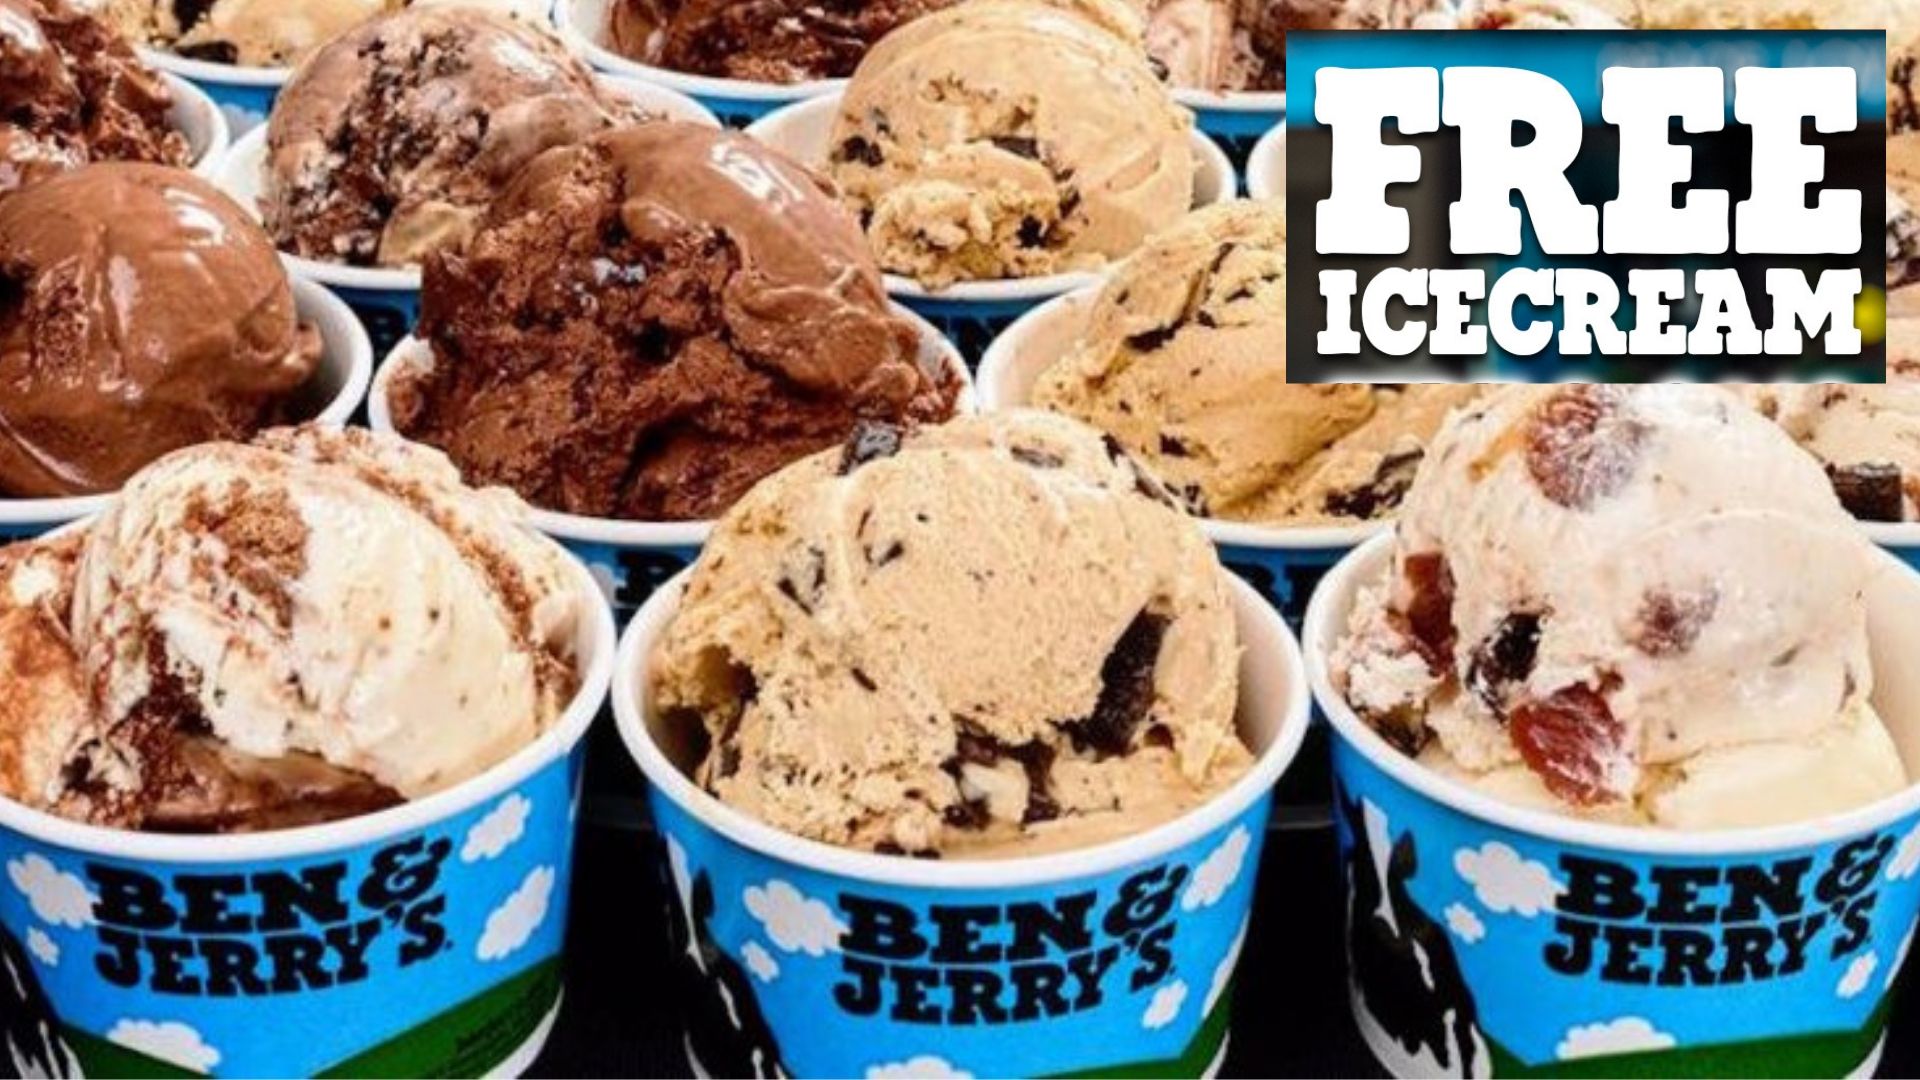 Ben-Jerry-Free-Ice-Cream-for-one-day - LifeStyle 